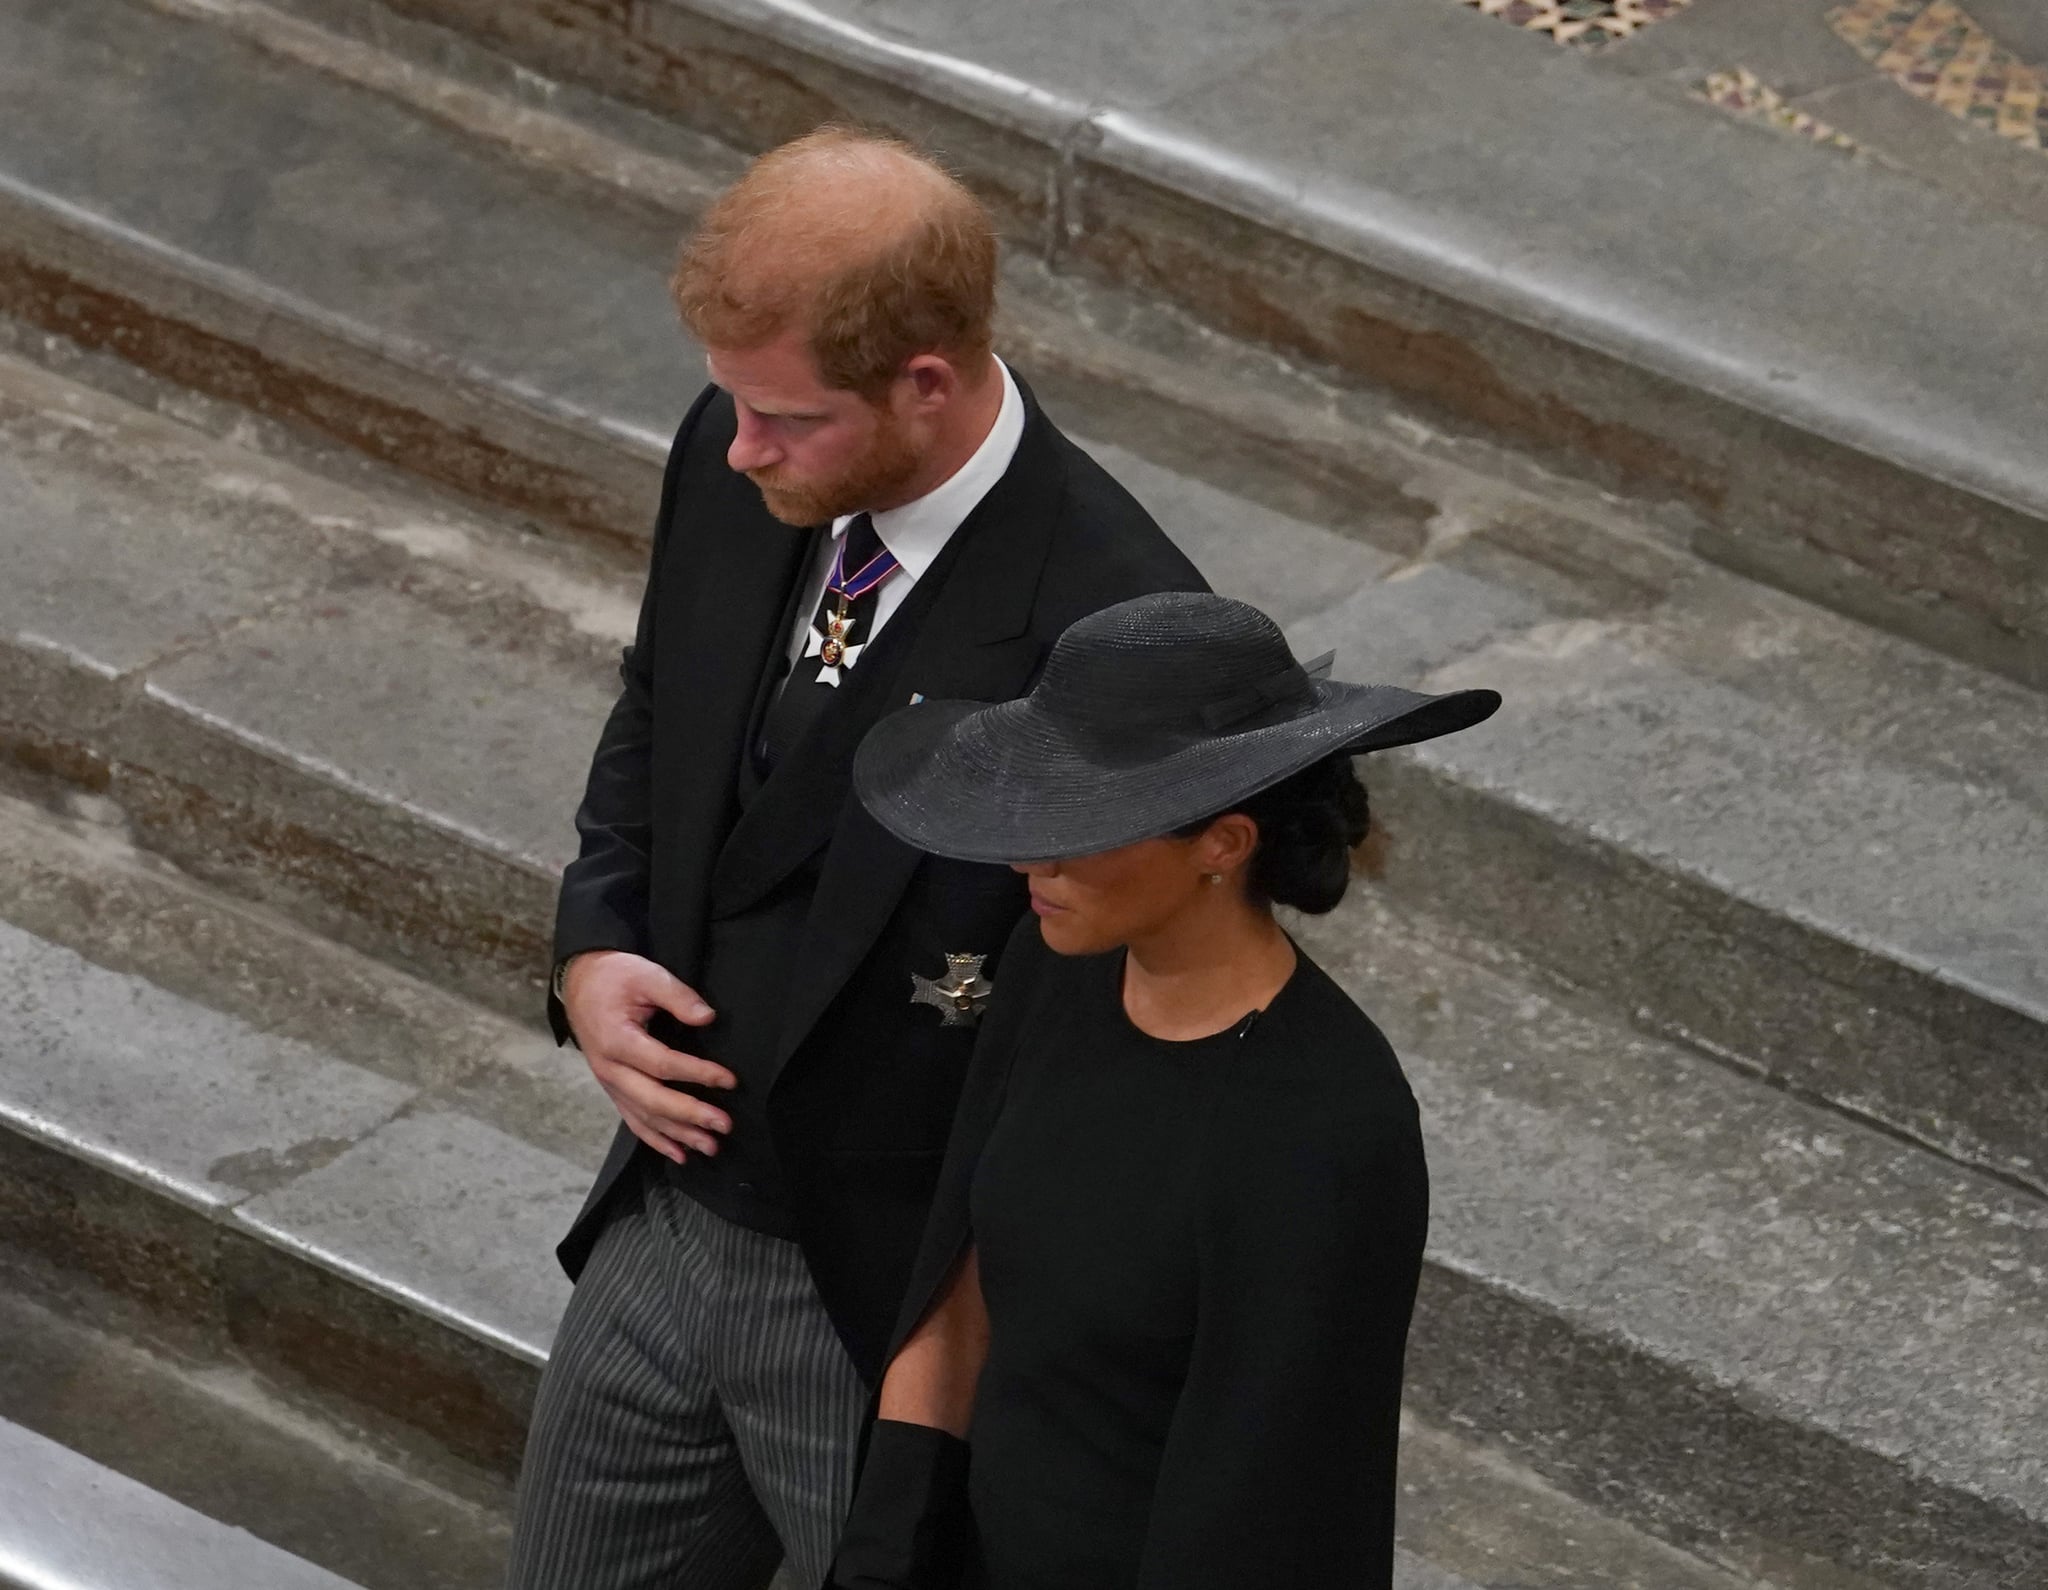 LONDON, ENGLAND - SEPTEMBER 19:  Prince Harry, Duke of Sussex and Meghan, Duchess of Sussex follow the bearer party with the coffin as they take part in the state funeral and burial of Queen Elizabeth II at Westminster Abbey on September 19, 2022 in London, England. Elizabeth Alexandra Mary Windsor was born in Bruton Street, Mayfair, London on 21 April 1926. She married Prince Philip in 1947 and ascended the throne of the United Kingdom and Commonwealth on 6 February 1952 after the death of her Father, King George VI. Queen Elizabeth II died at Balmoral Castle in Scotland on September 8, 2022, and is succeeded by her eldest son, King Charles III.  (Photo by Gareth Fuller- WPA Pool/Getty Images)